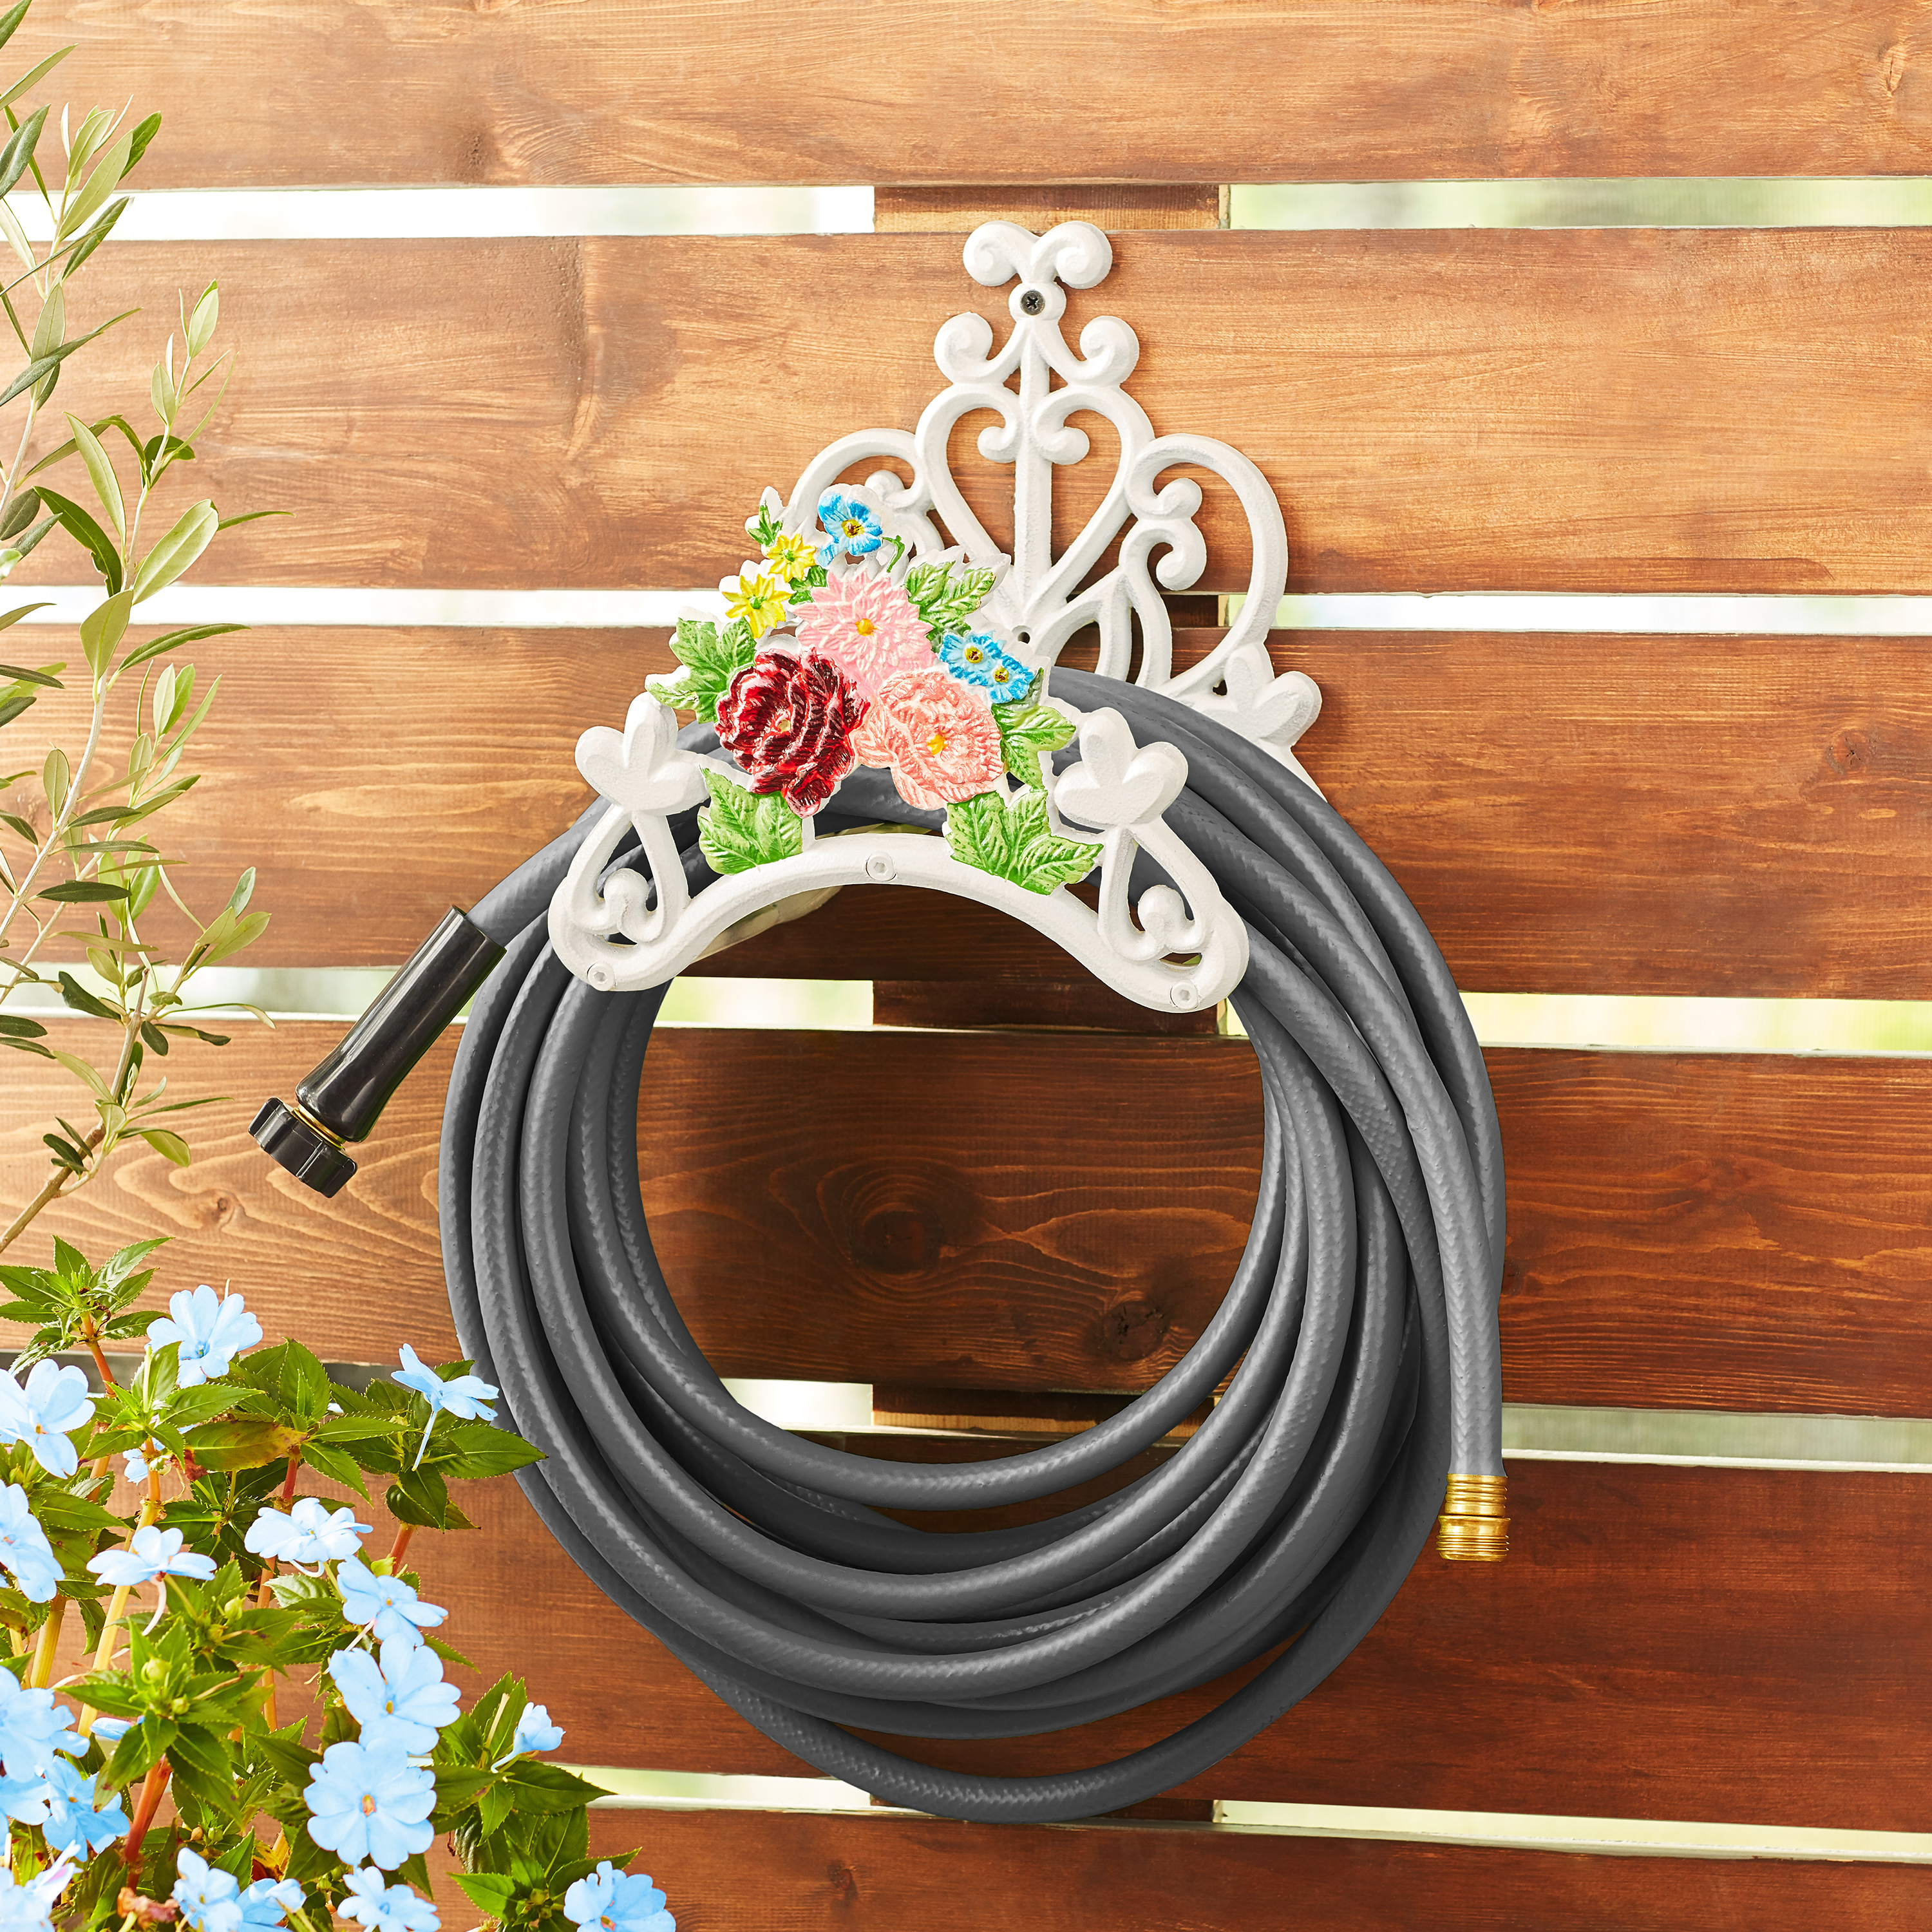 The Pioneer Woman Decorative Metal Floral Hose Hanger, White - image 2 of 7